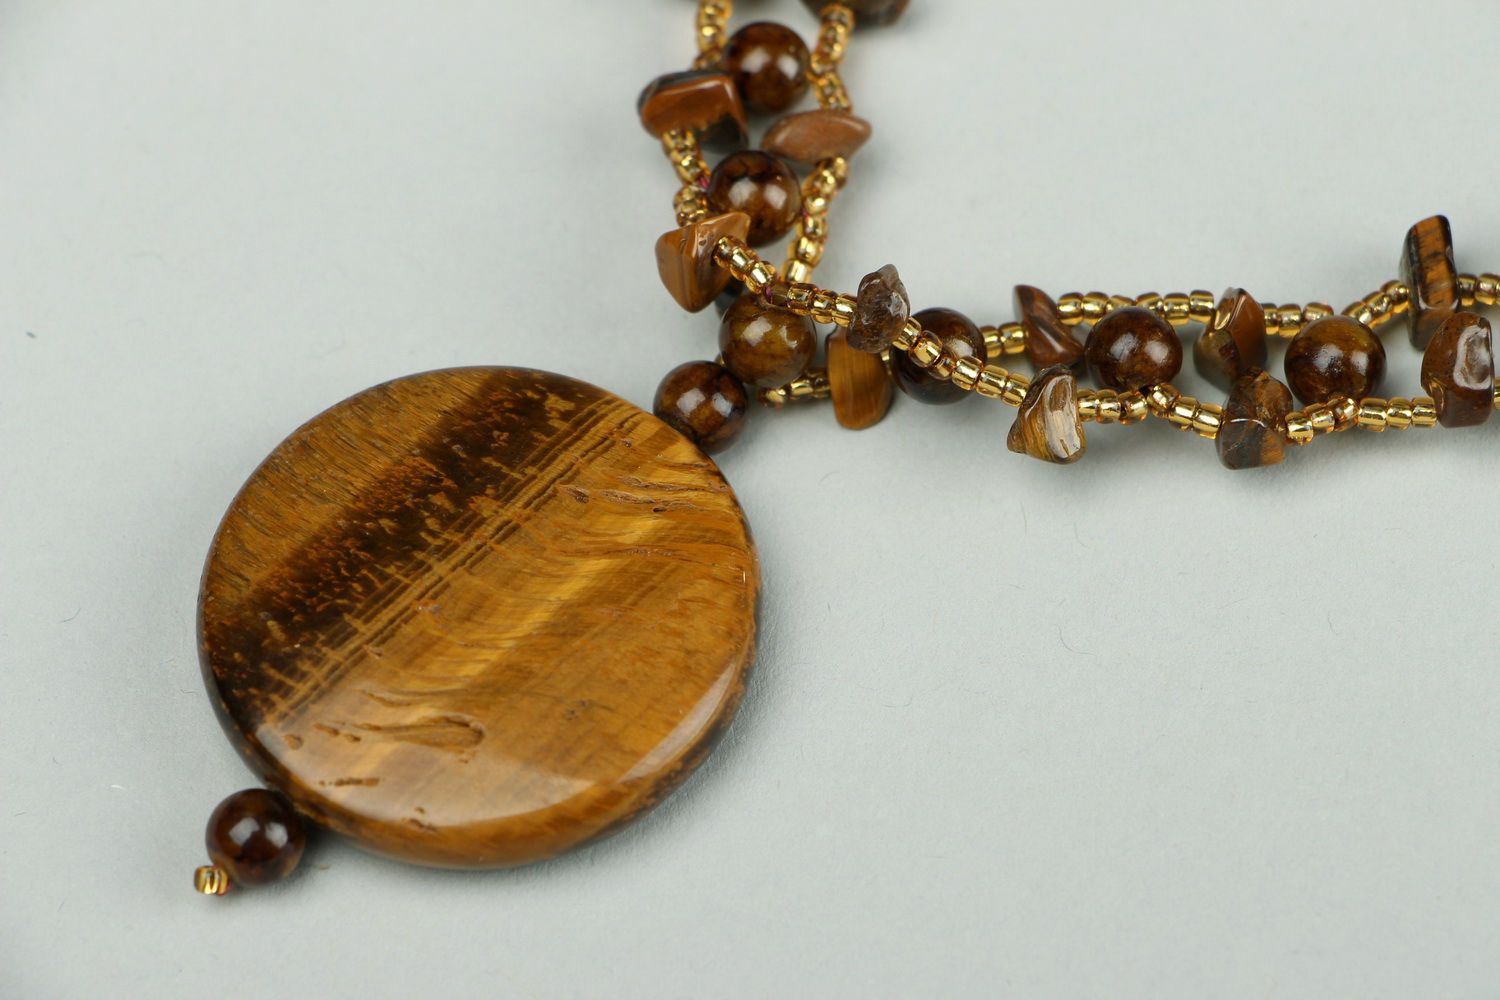 Necklace made of beads and tiger's eye stone photo 3